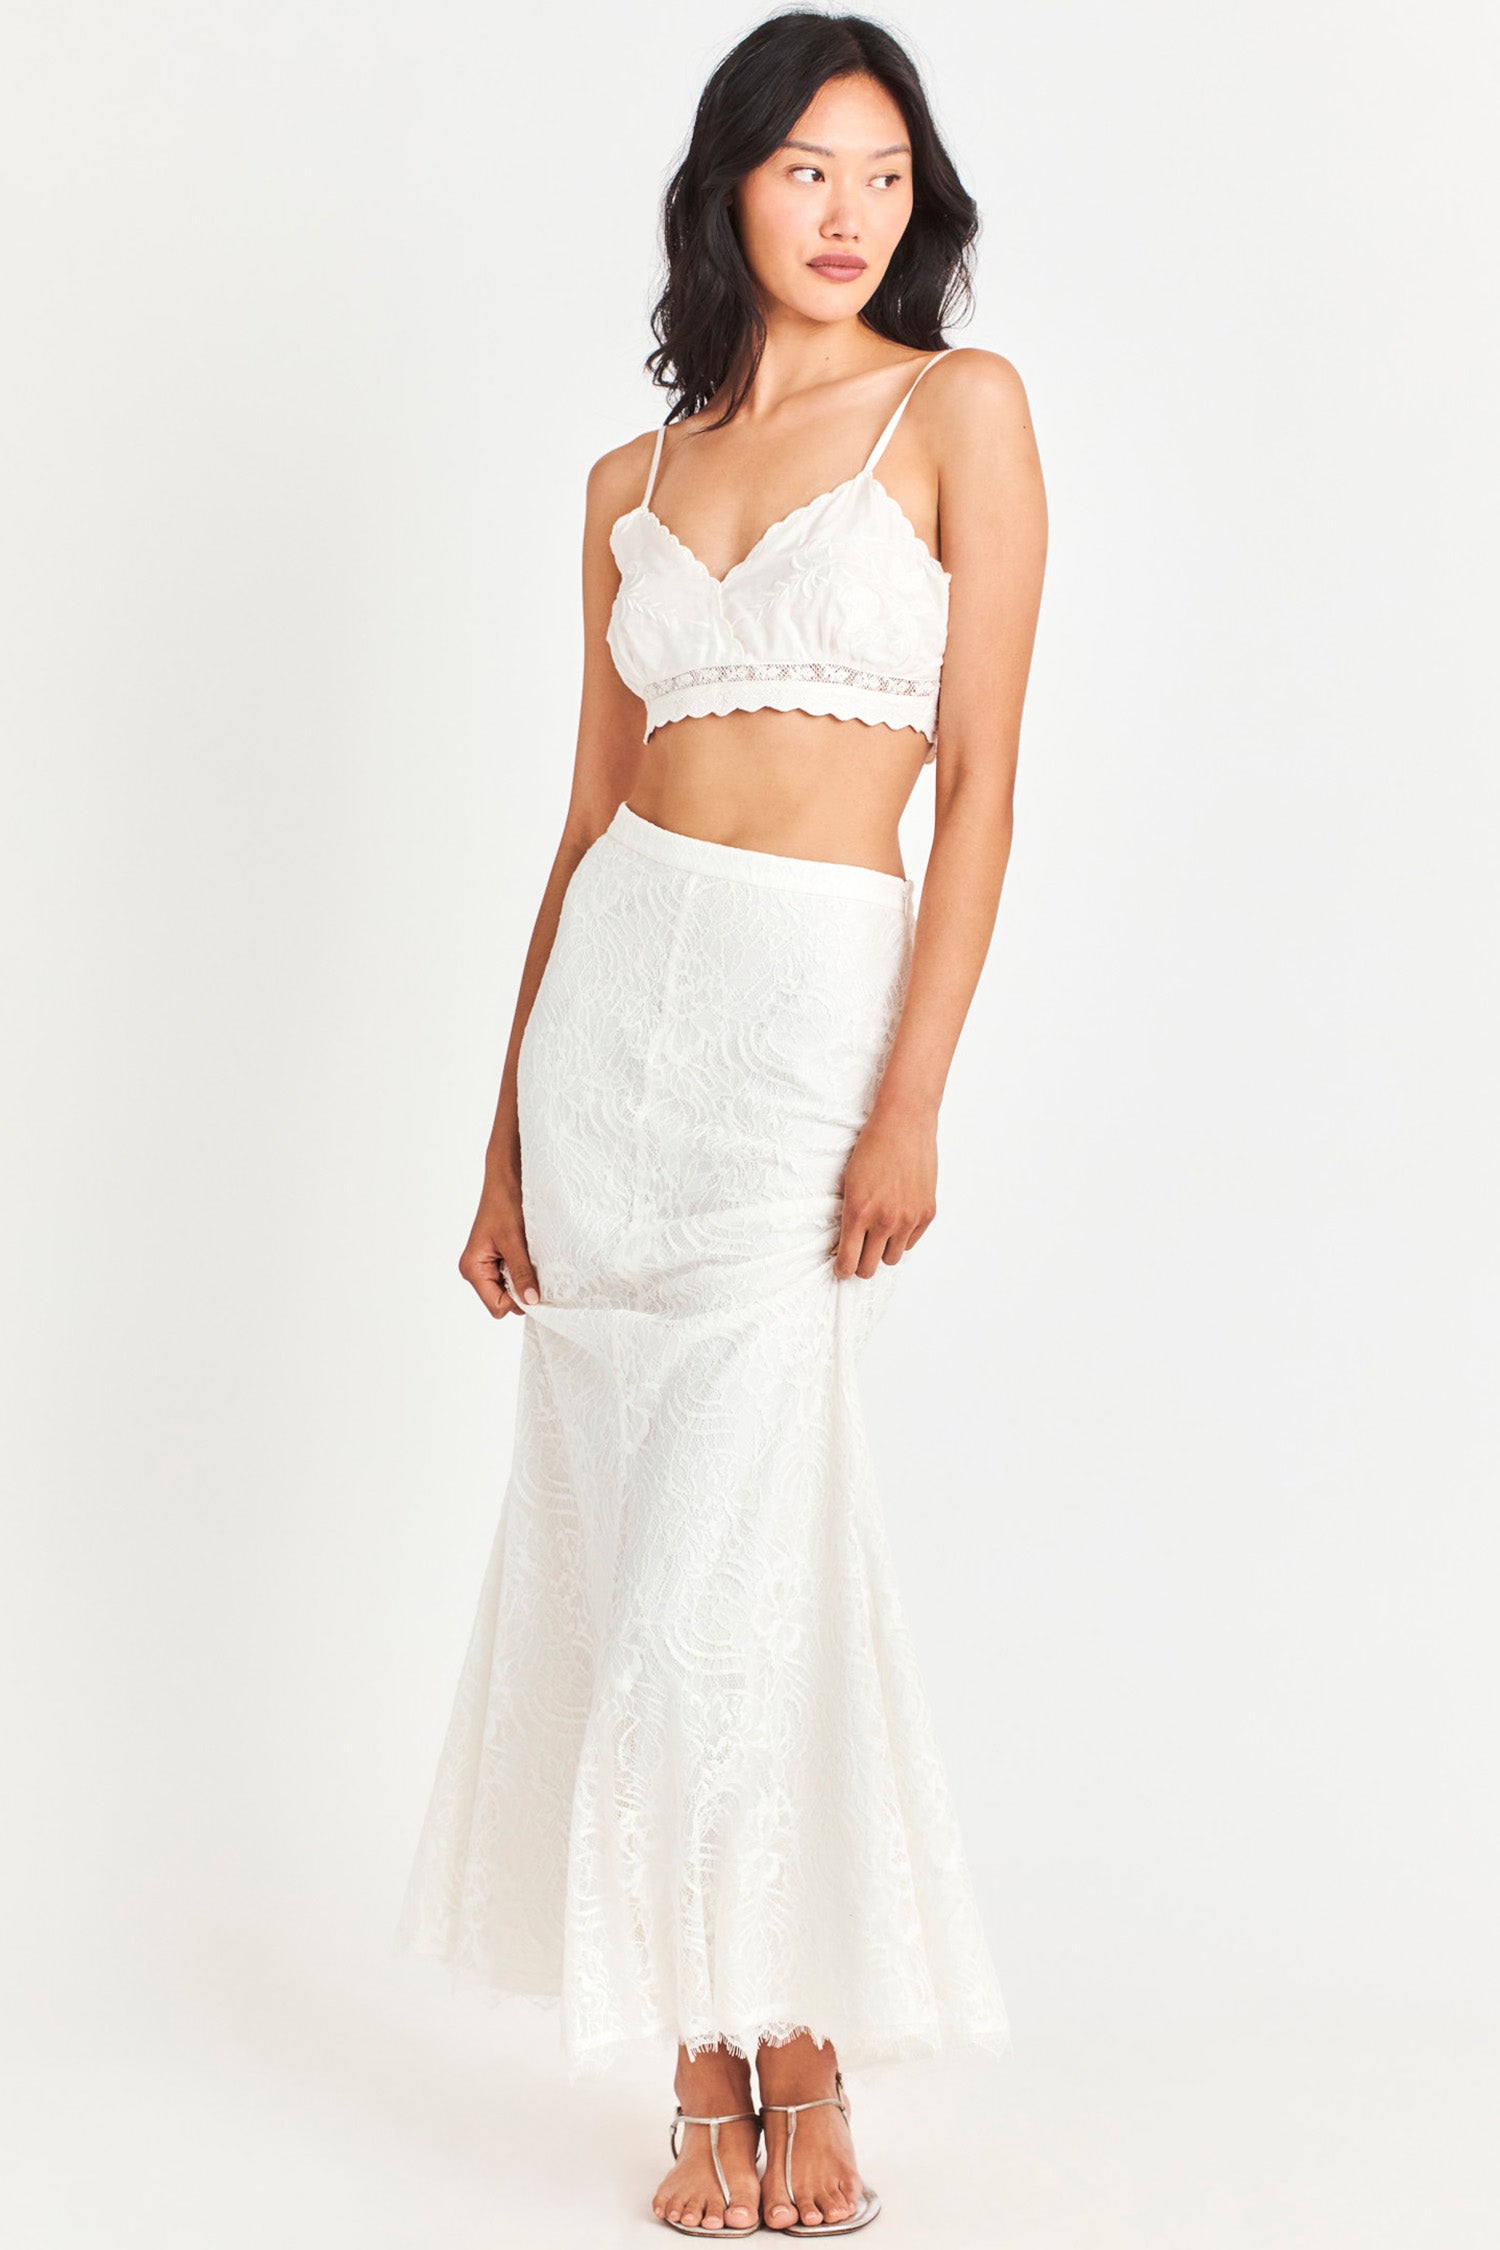 White fitted skirt features custom lace